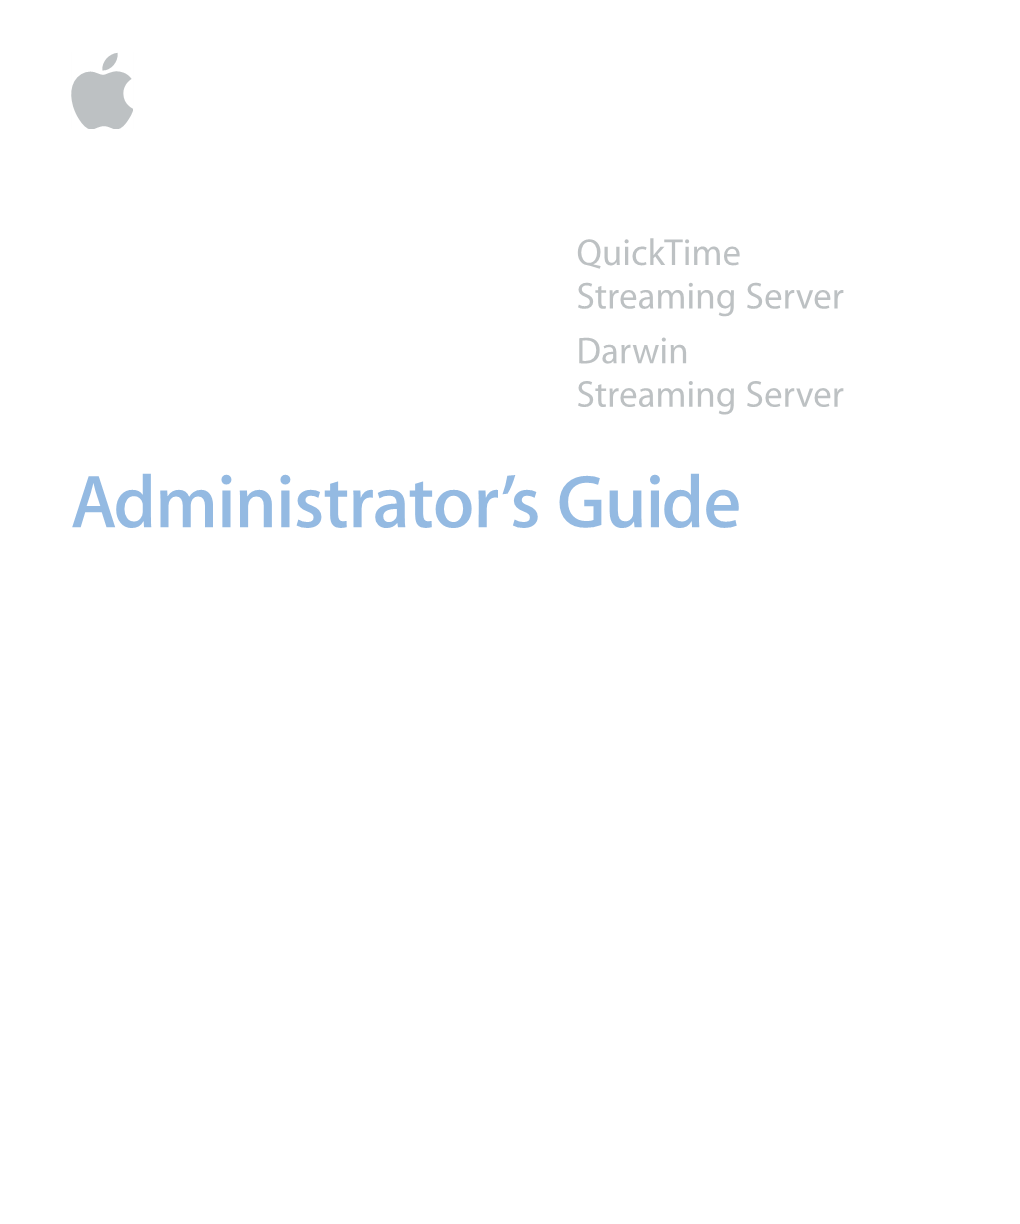 Quicktime (Darwin) Streaming Server Administrator's Guide (Manual)